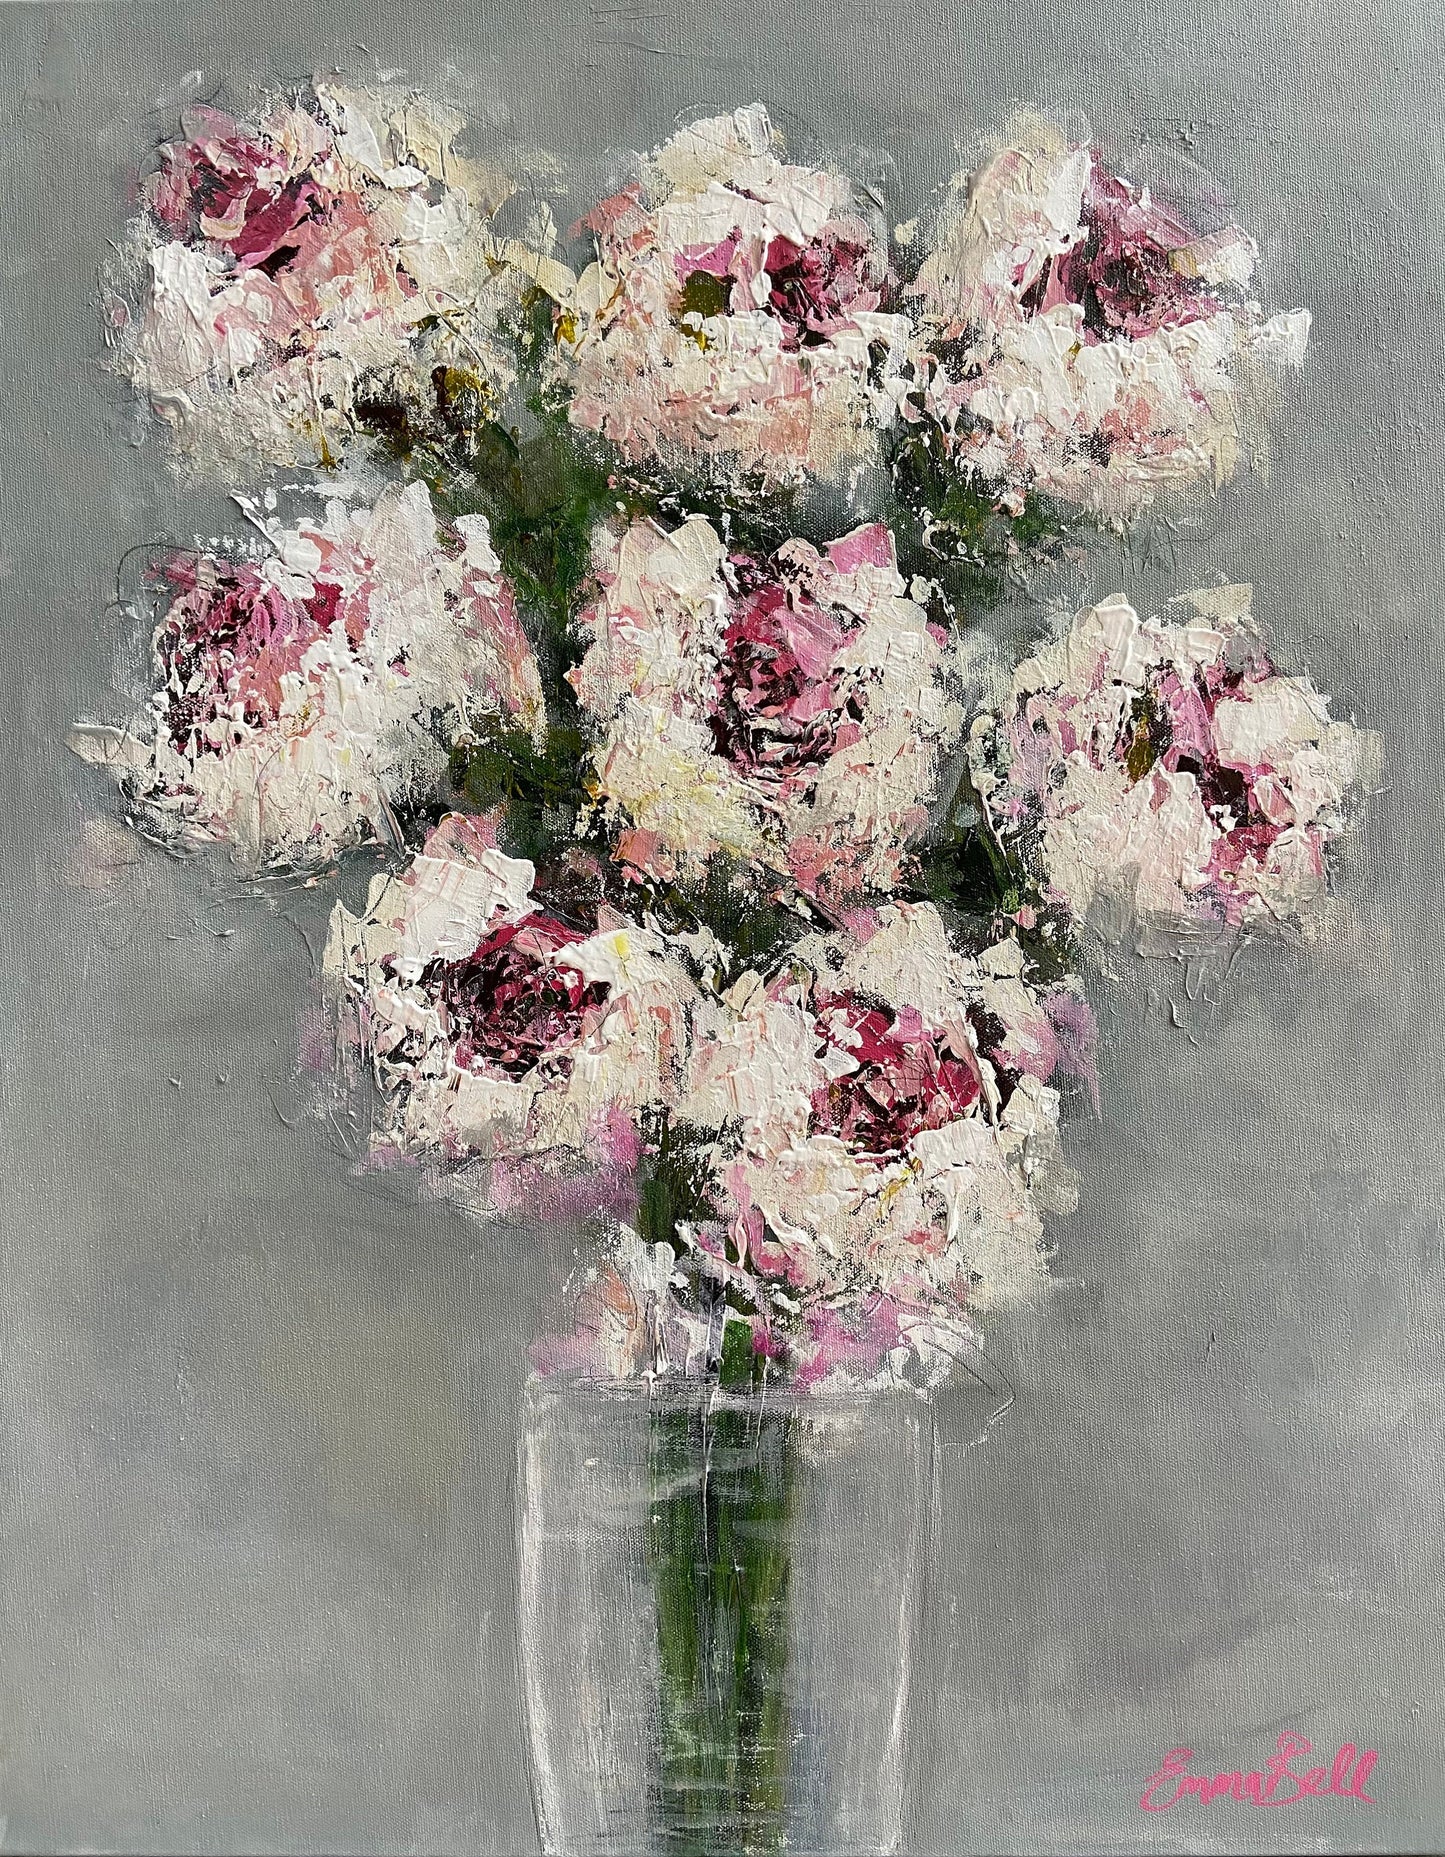 White Flowers in a Glass Vase